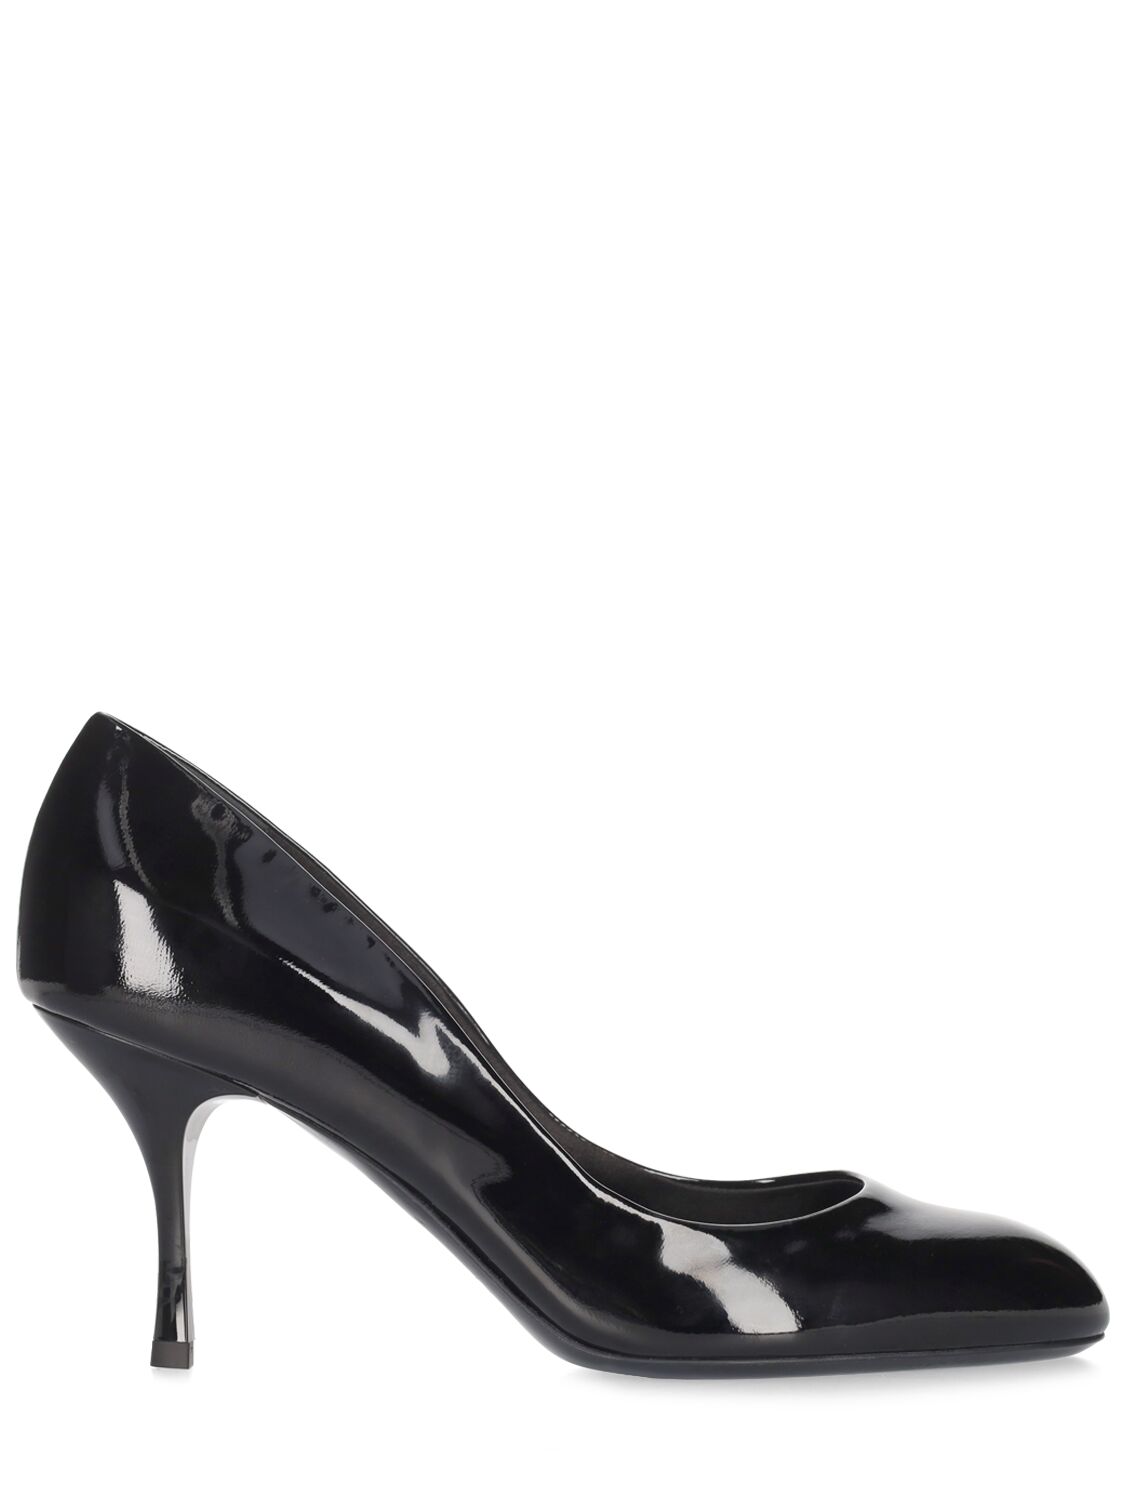 Shop Max Mara 80mm Marylin Shiny Patent Leather Pumps In Black